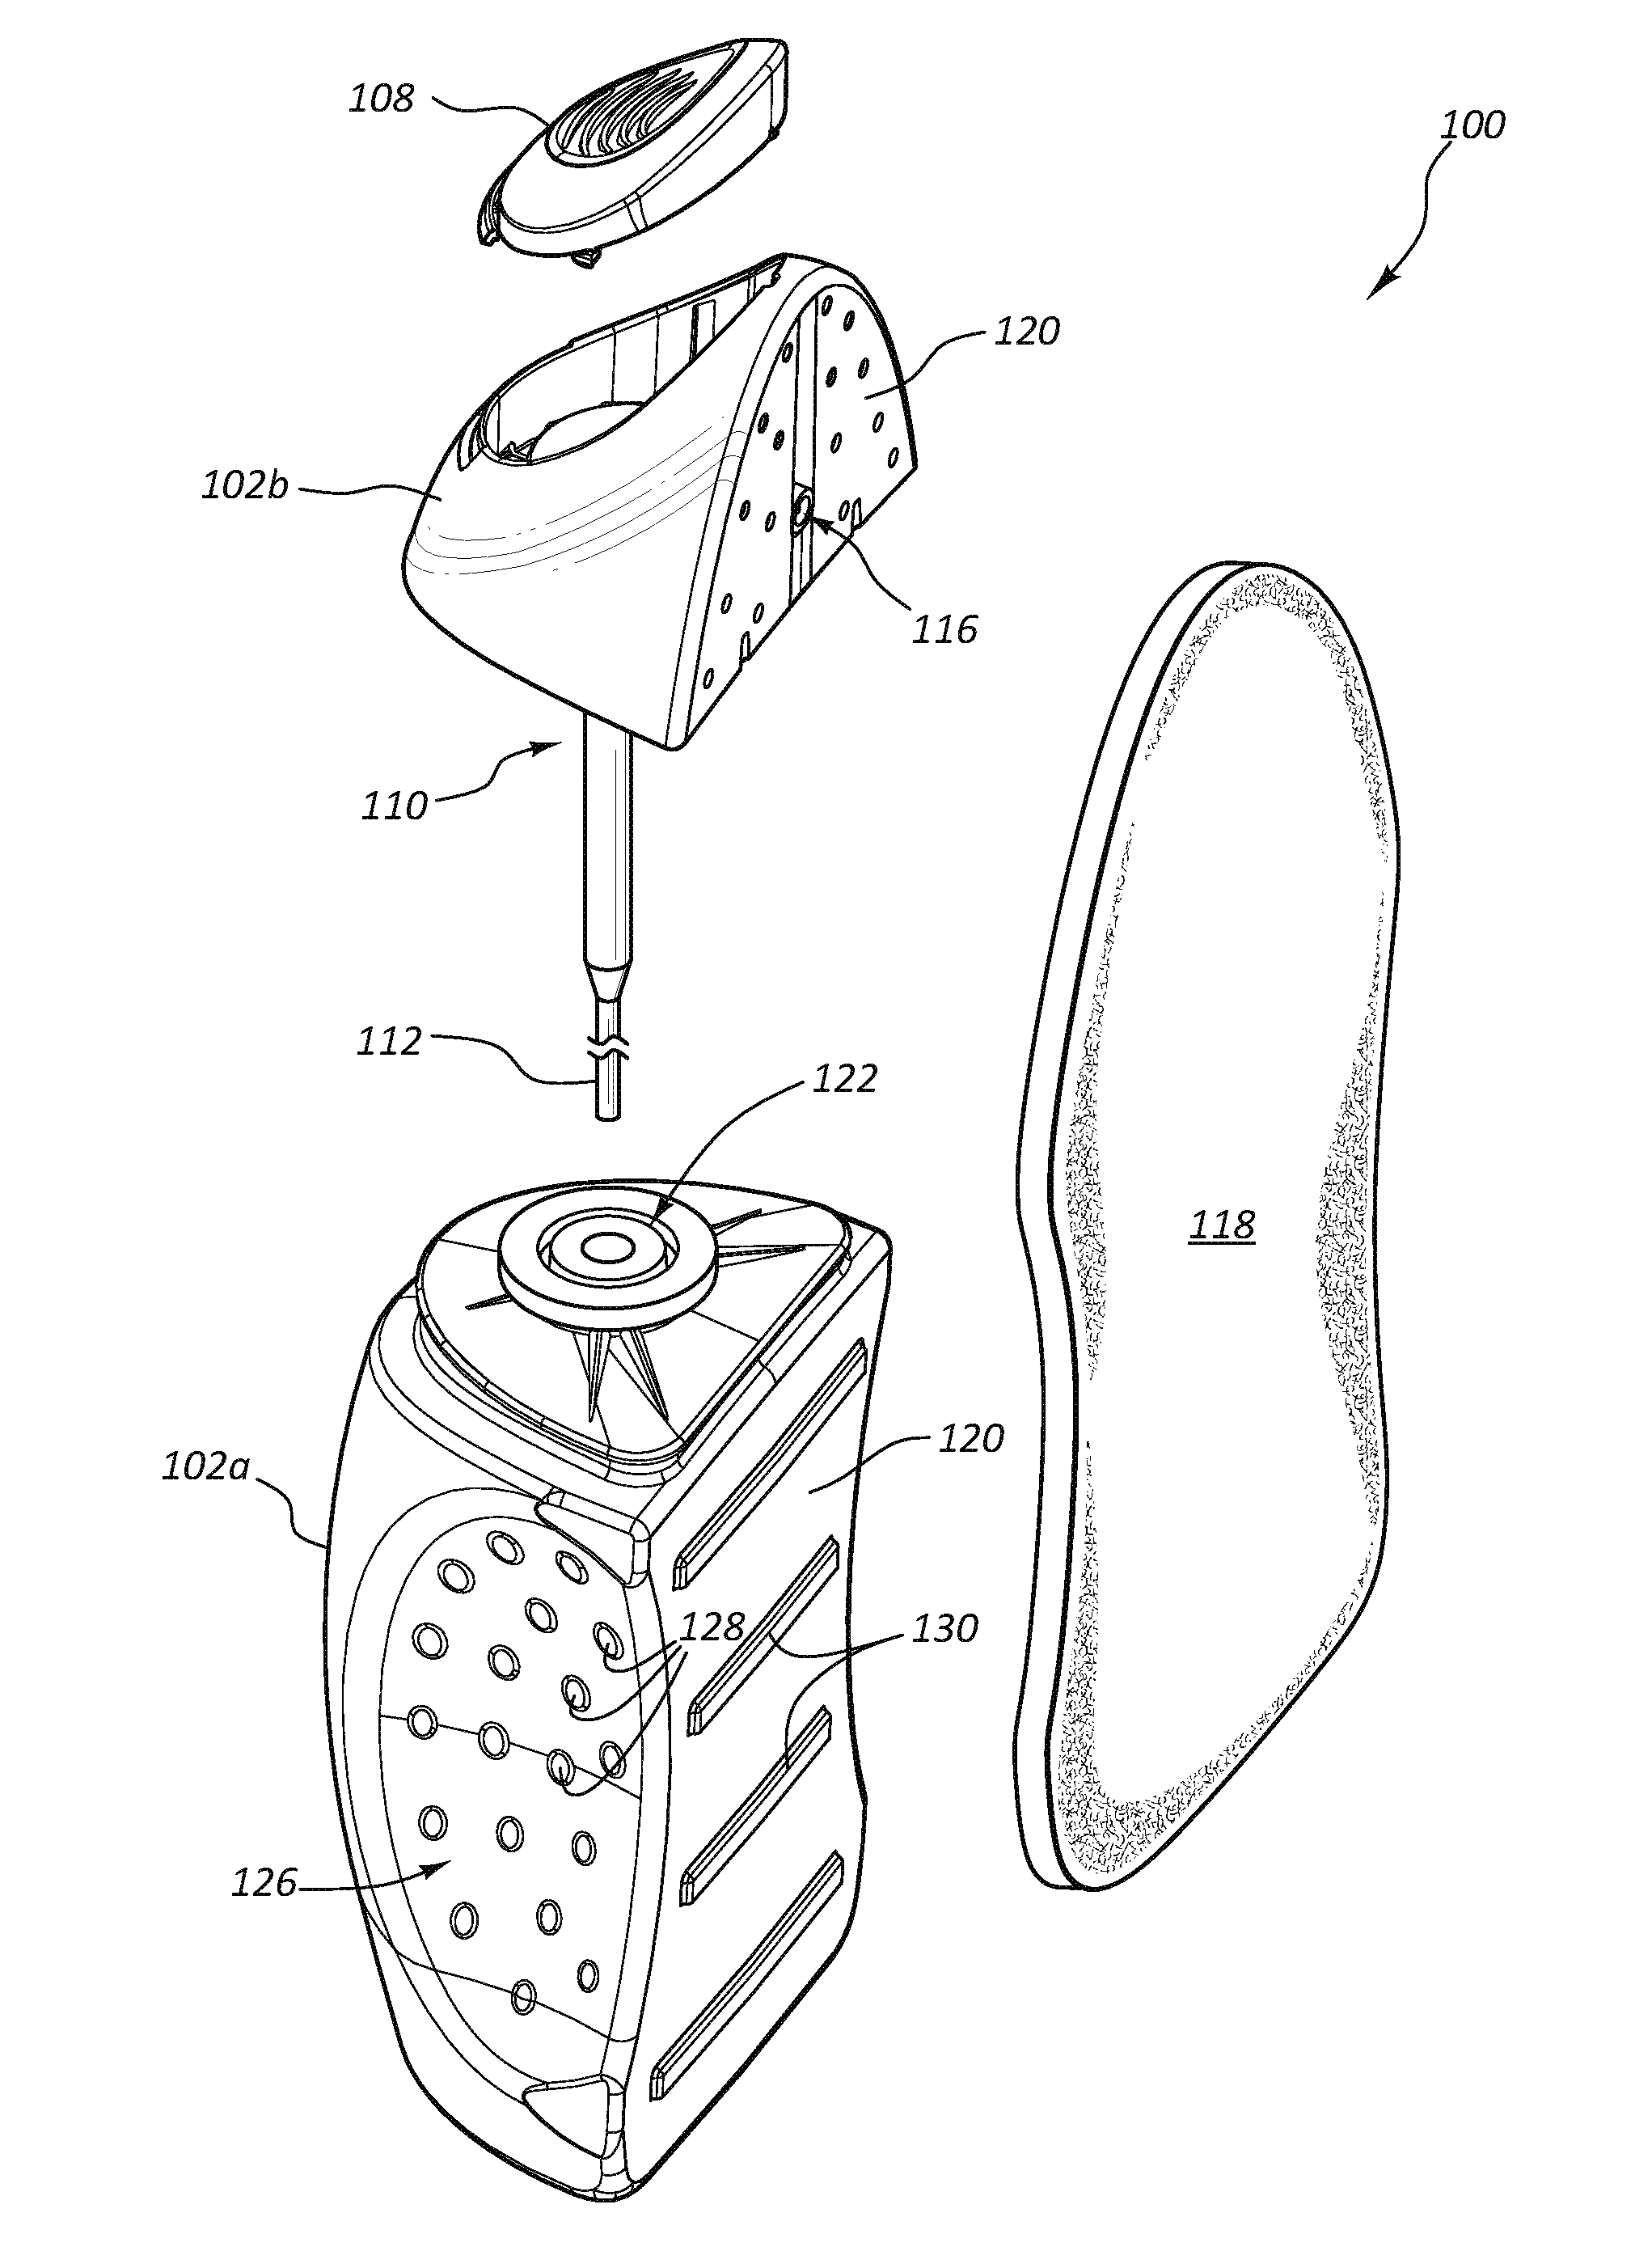 All-in-one scrubbing tool with hook for substrate attachment